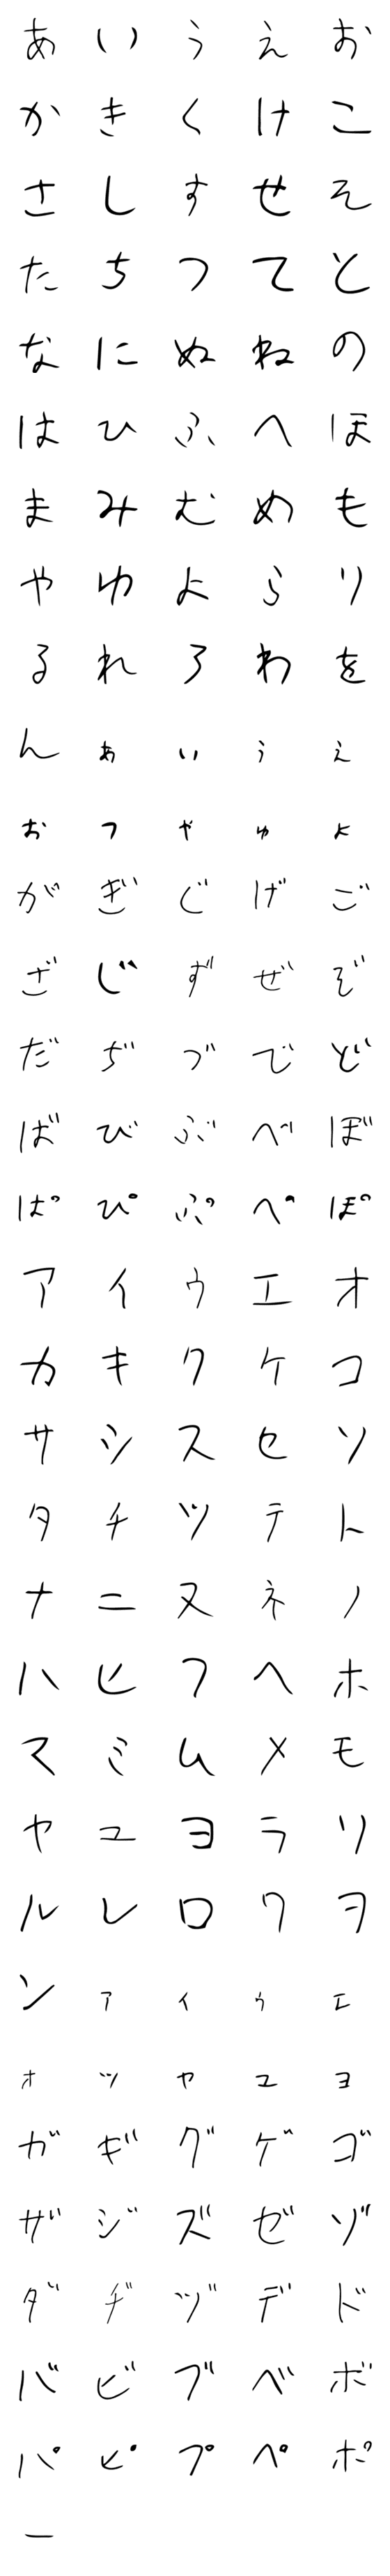 [LINE絵文字]ゆーろー文字の画像一覧